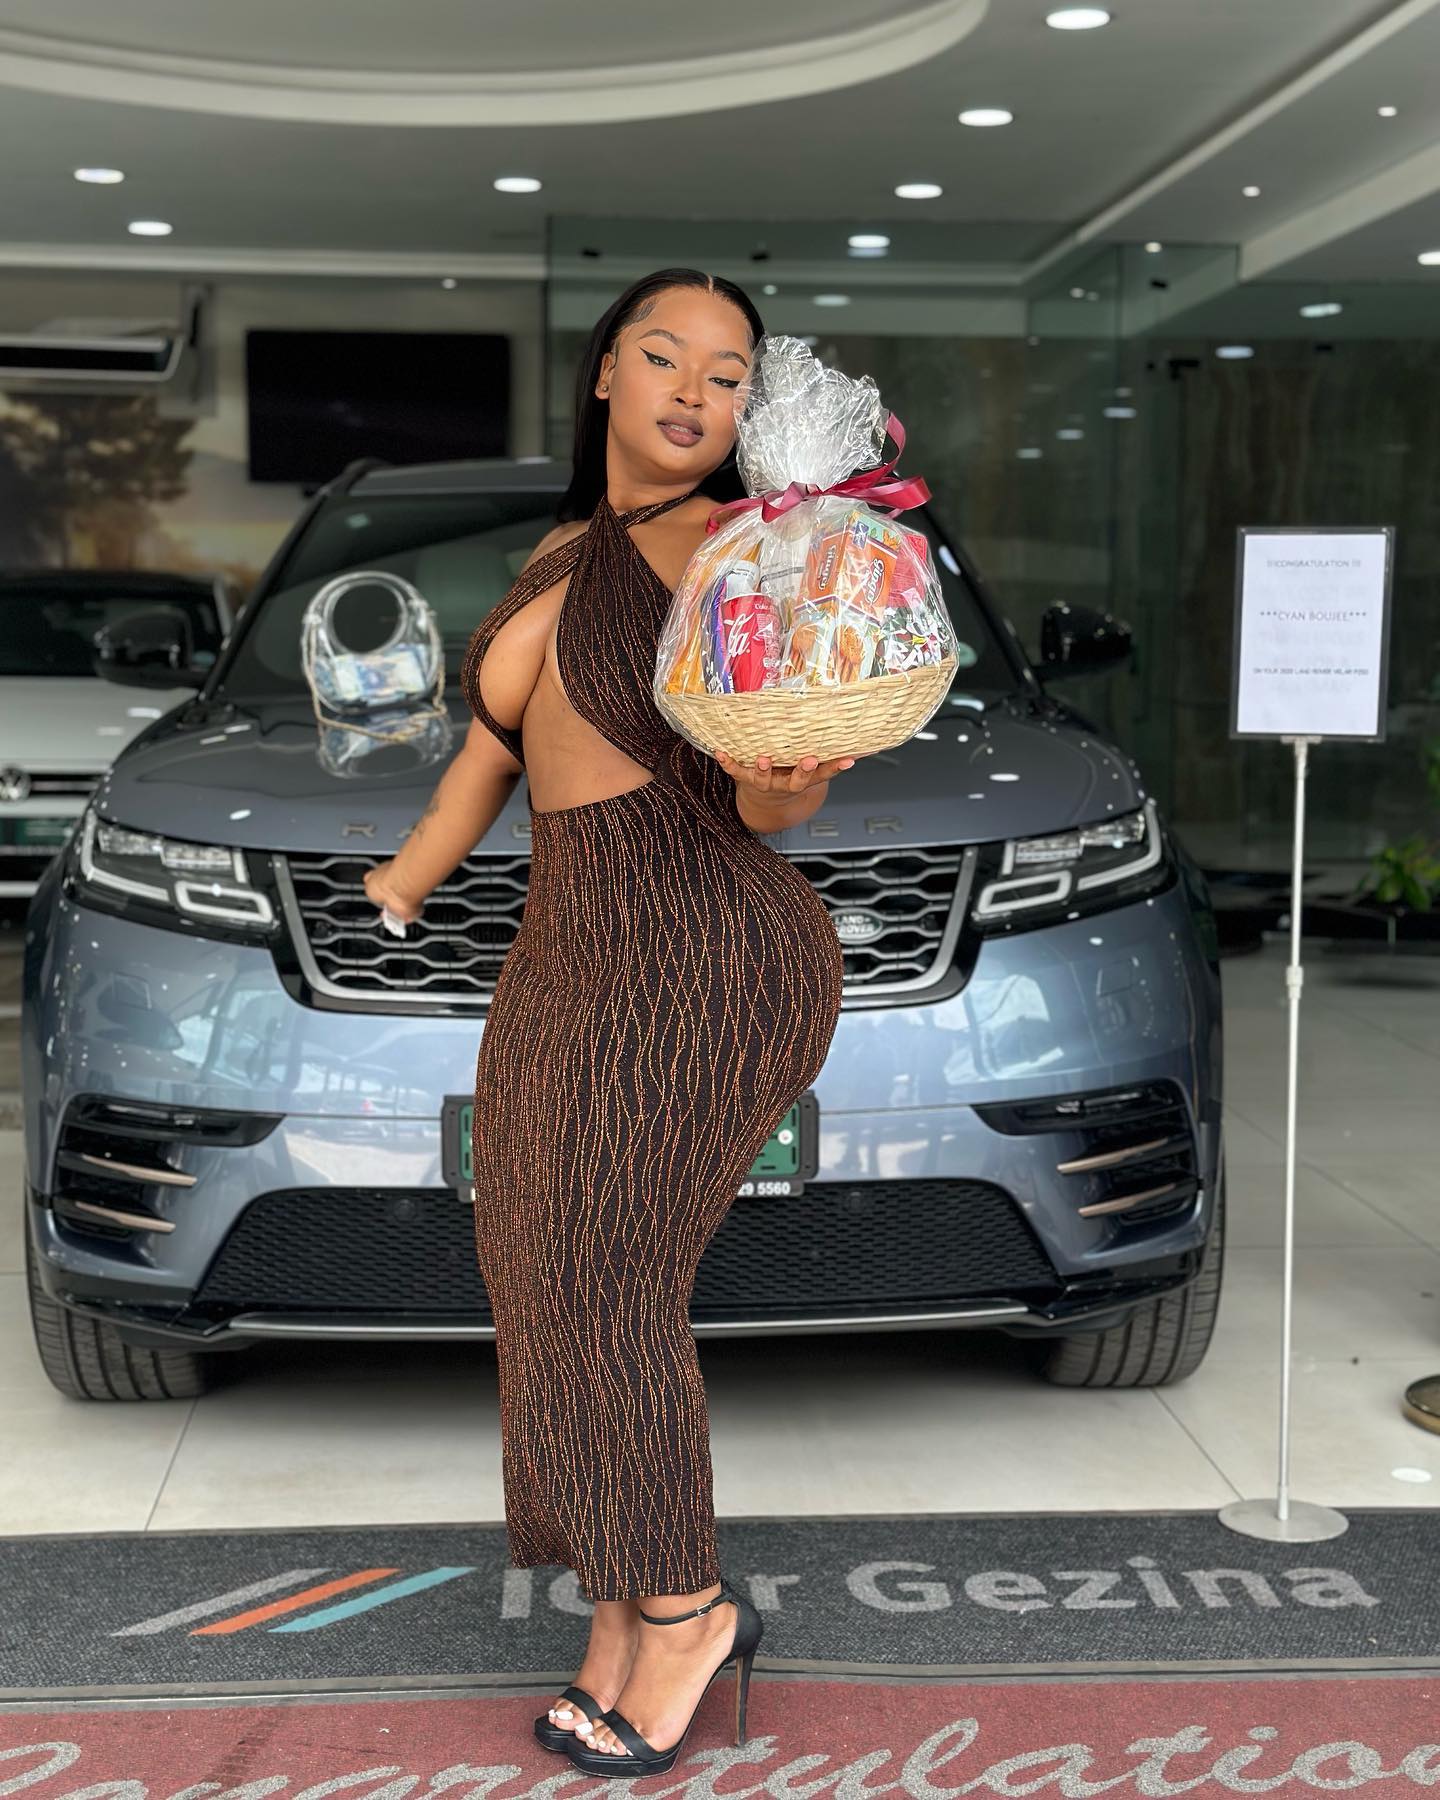 Cyan Boujee is attracting attention with her newly acquired Land Rover Velar. 23